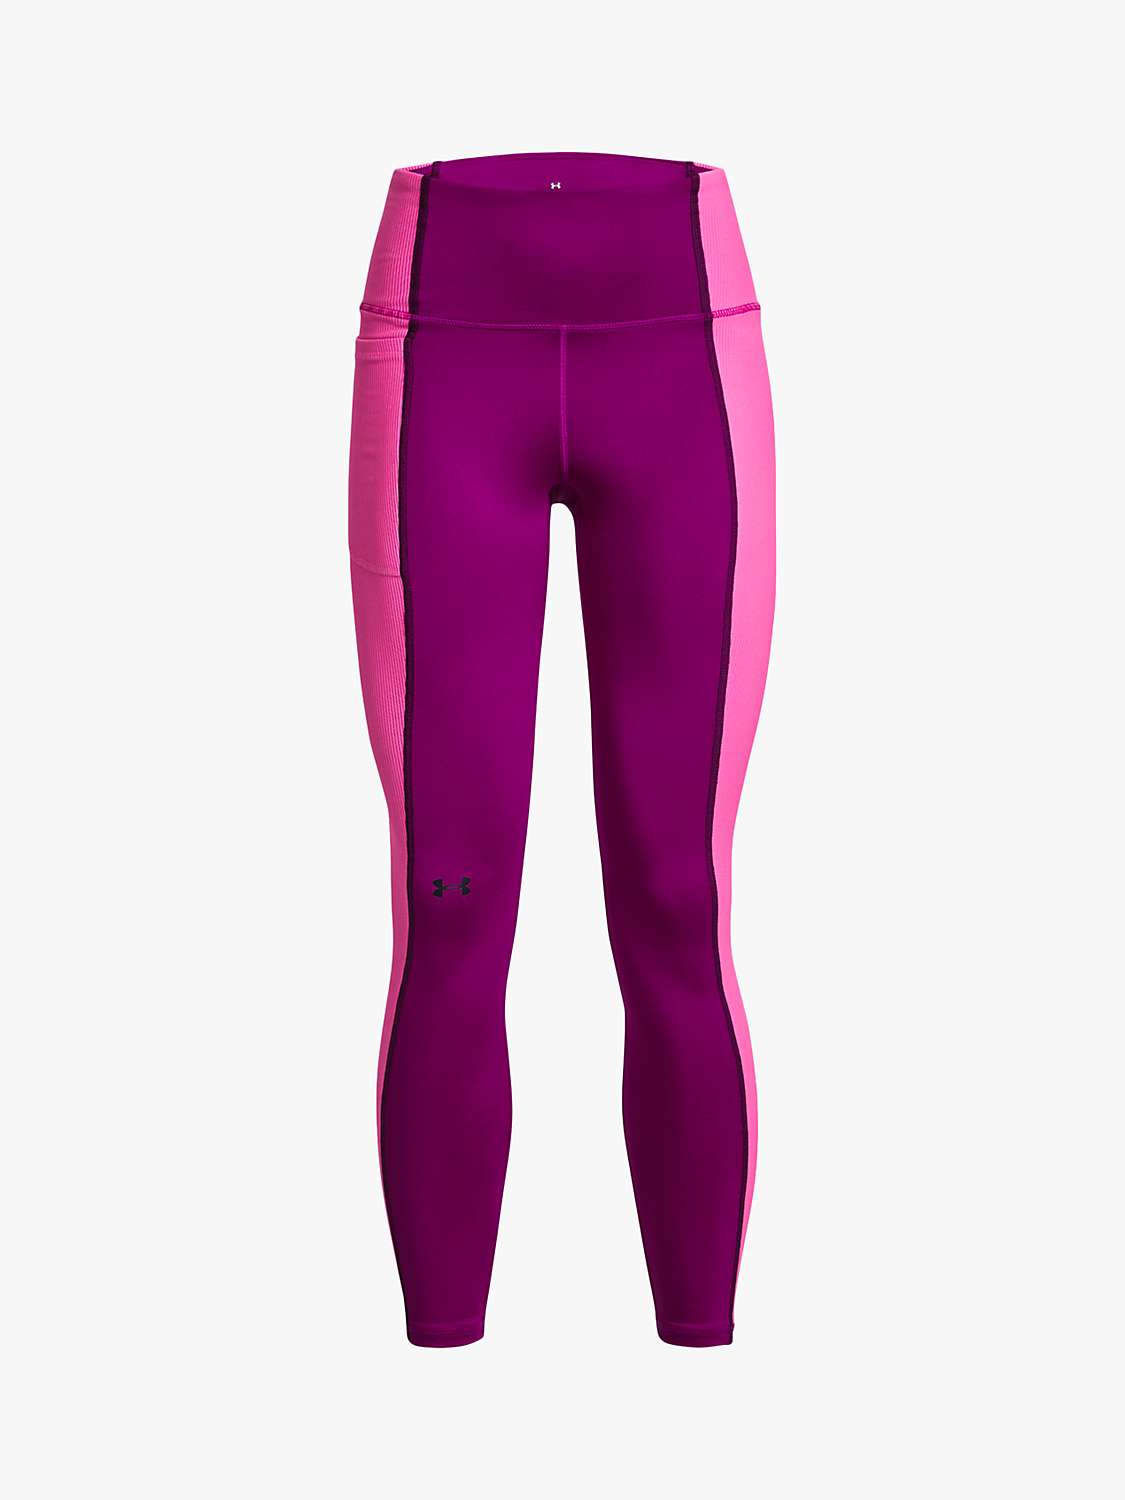 Buy Under Armour Train Cold Weather Gym Leggings Online at johnlewis.com